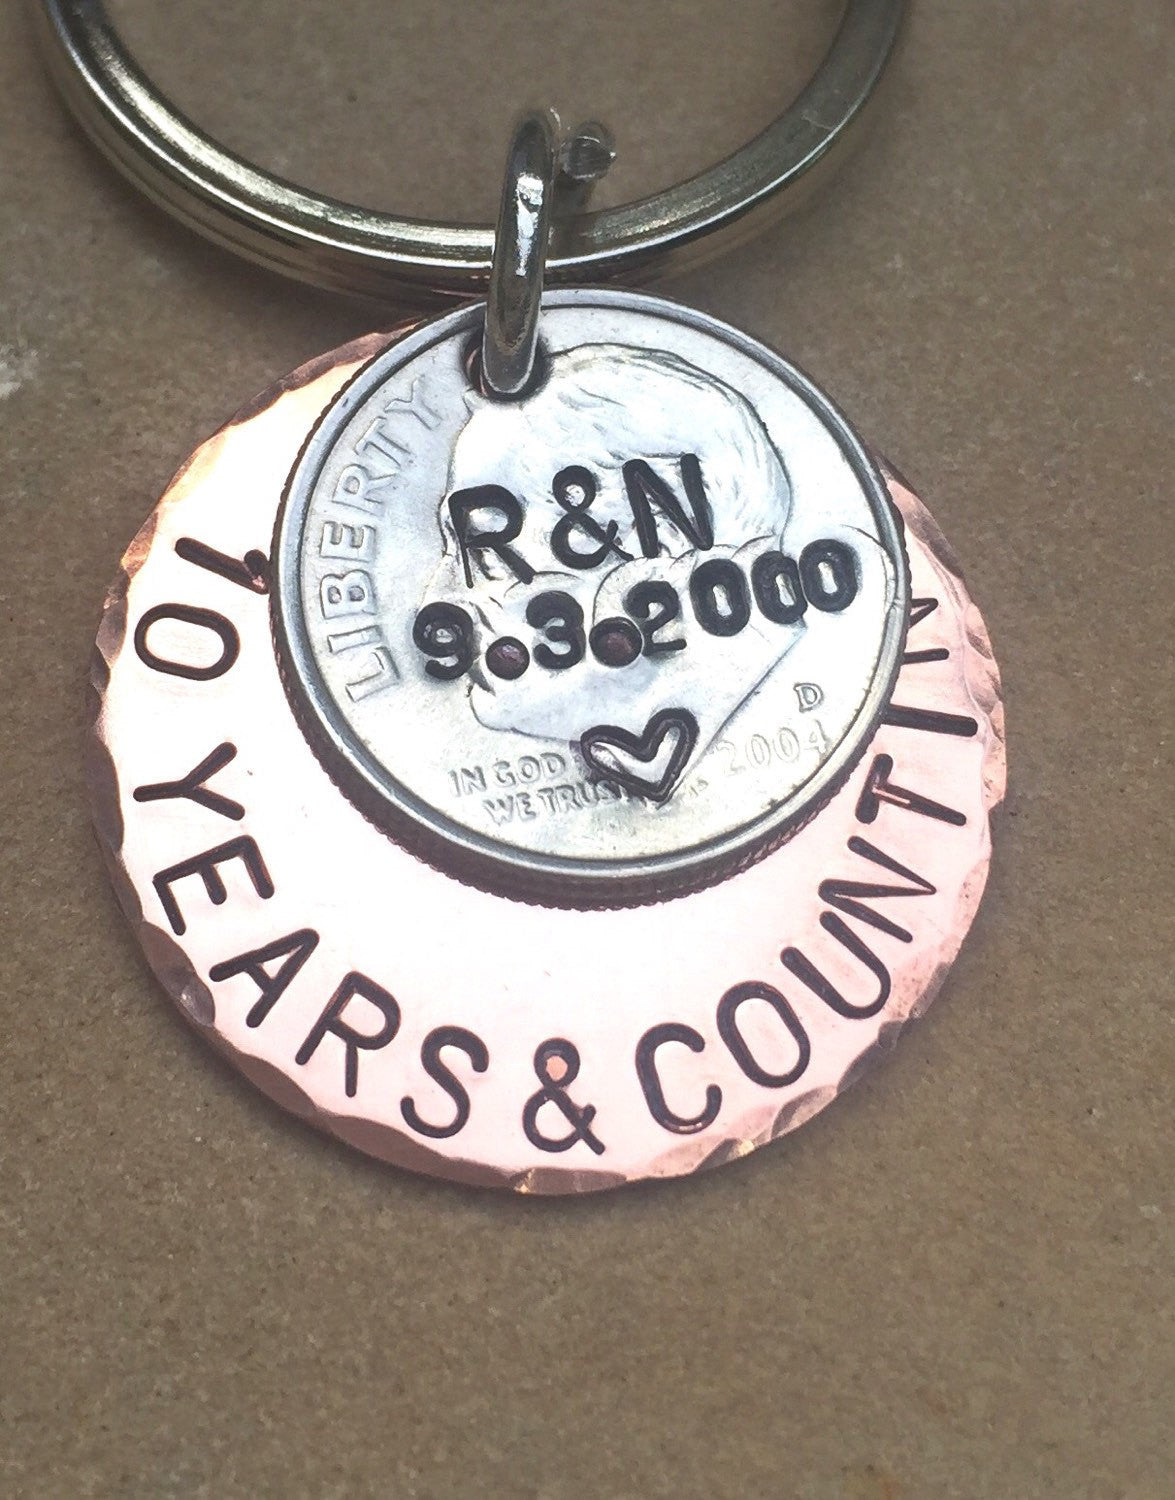 Anniversary Gifts, 10 Years And Counting Gift, Custom Keychains, Natashaaloha - Natashaaloha, jewelry, bracelets, necklace, keychains, fishing lures, gifts for men, charms, personalized, 